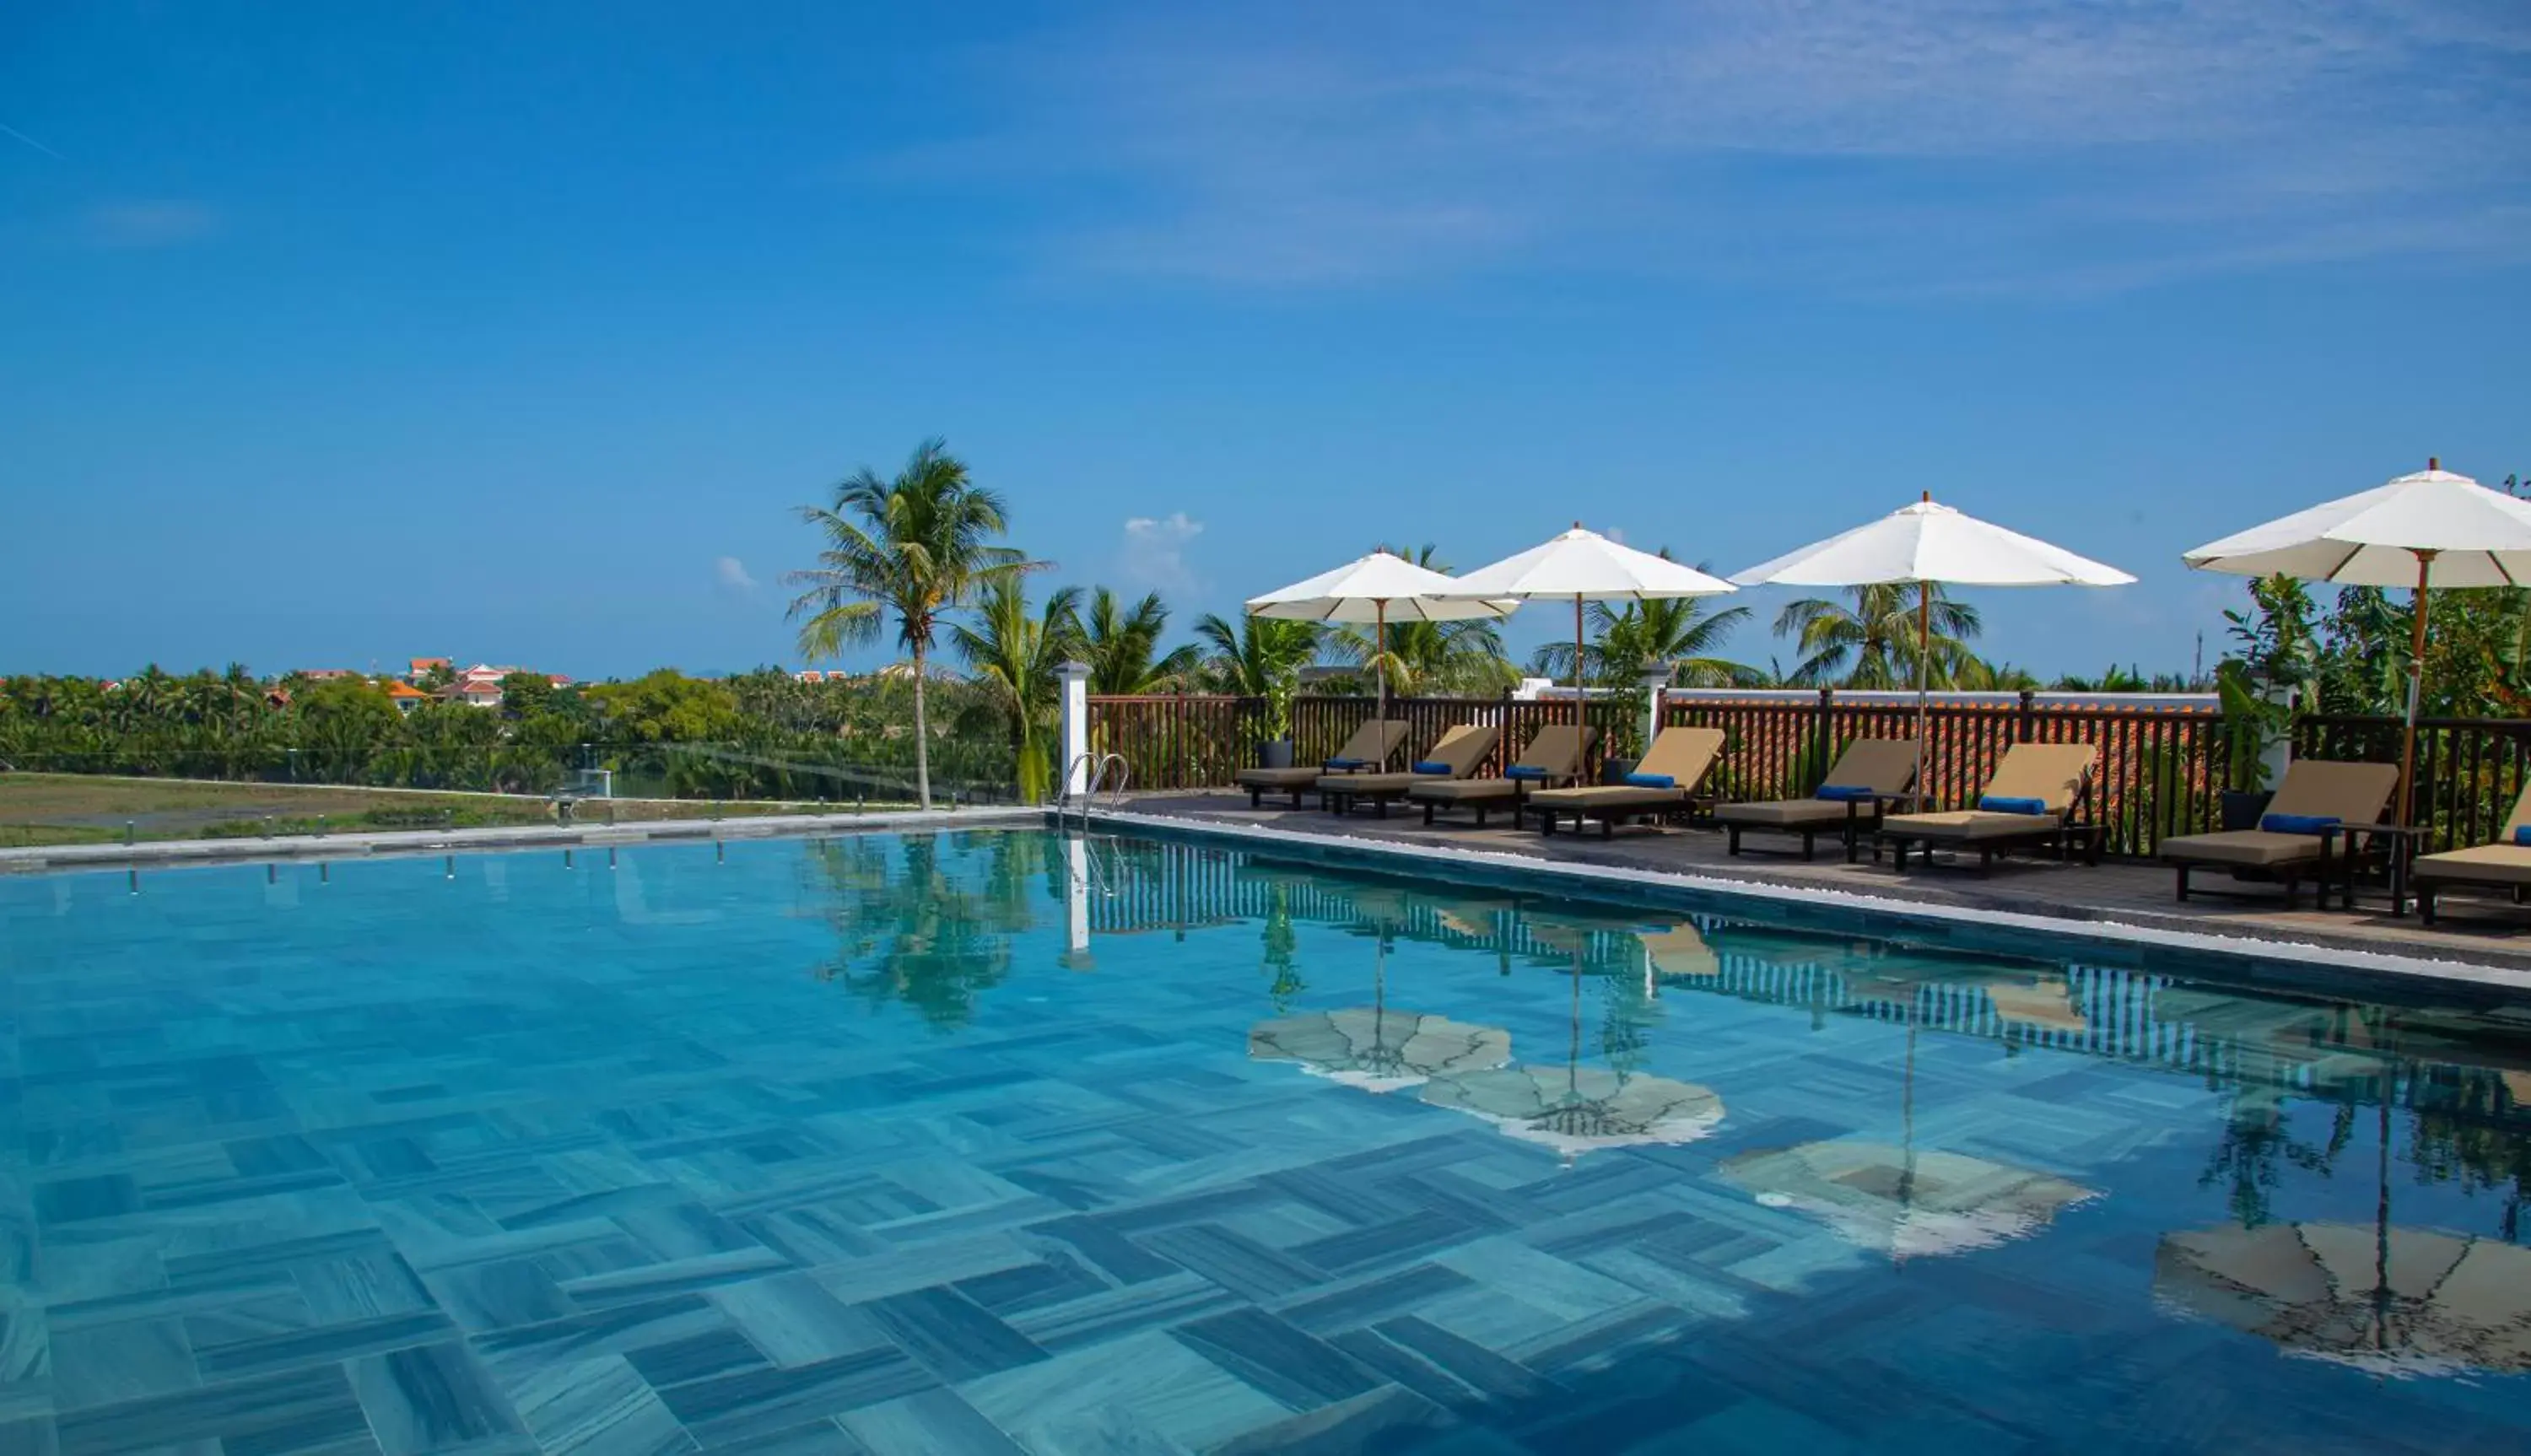 Swimming Pool in Legacy Hoi An Resort - formerly Ancient House Village Resort & Spa